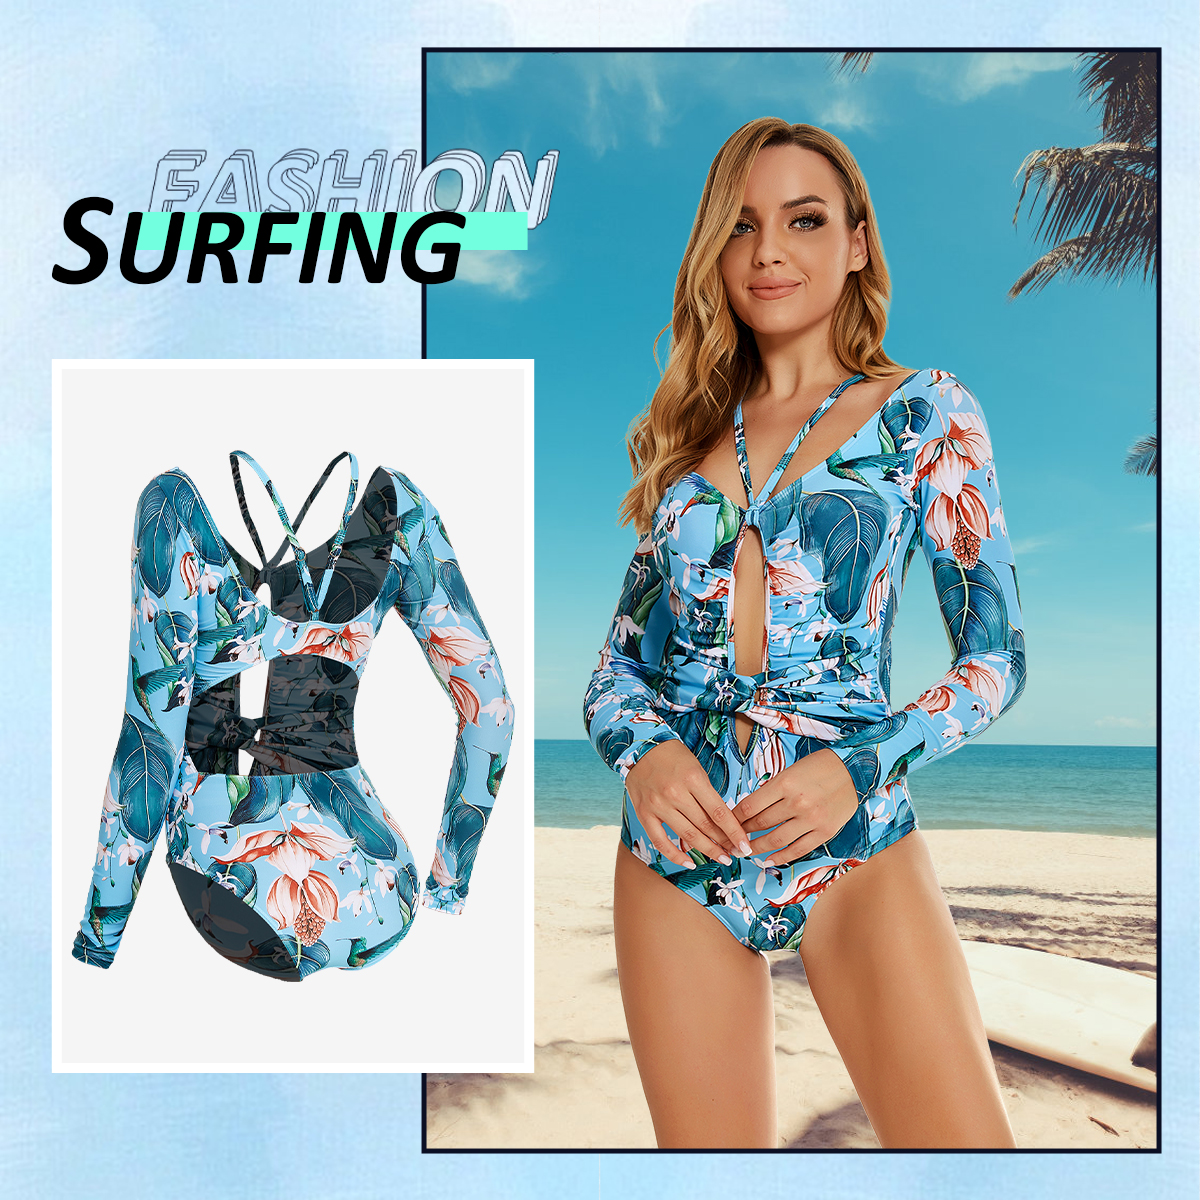 Starting at $13.99.
Free Shipping and Mystery Gift For You.
Summer Bloom！Embrace chic summer style.

#surfing #swimsuit #fashion #siysiy #fashion #beachlife #swimwear #beauty #summer #vacation #surfwear #cute #sunshine

bit.ly/3XuhdCB